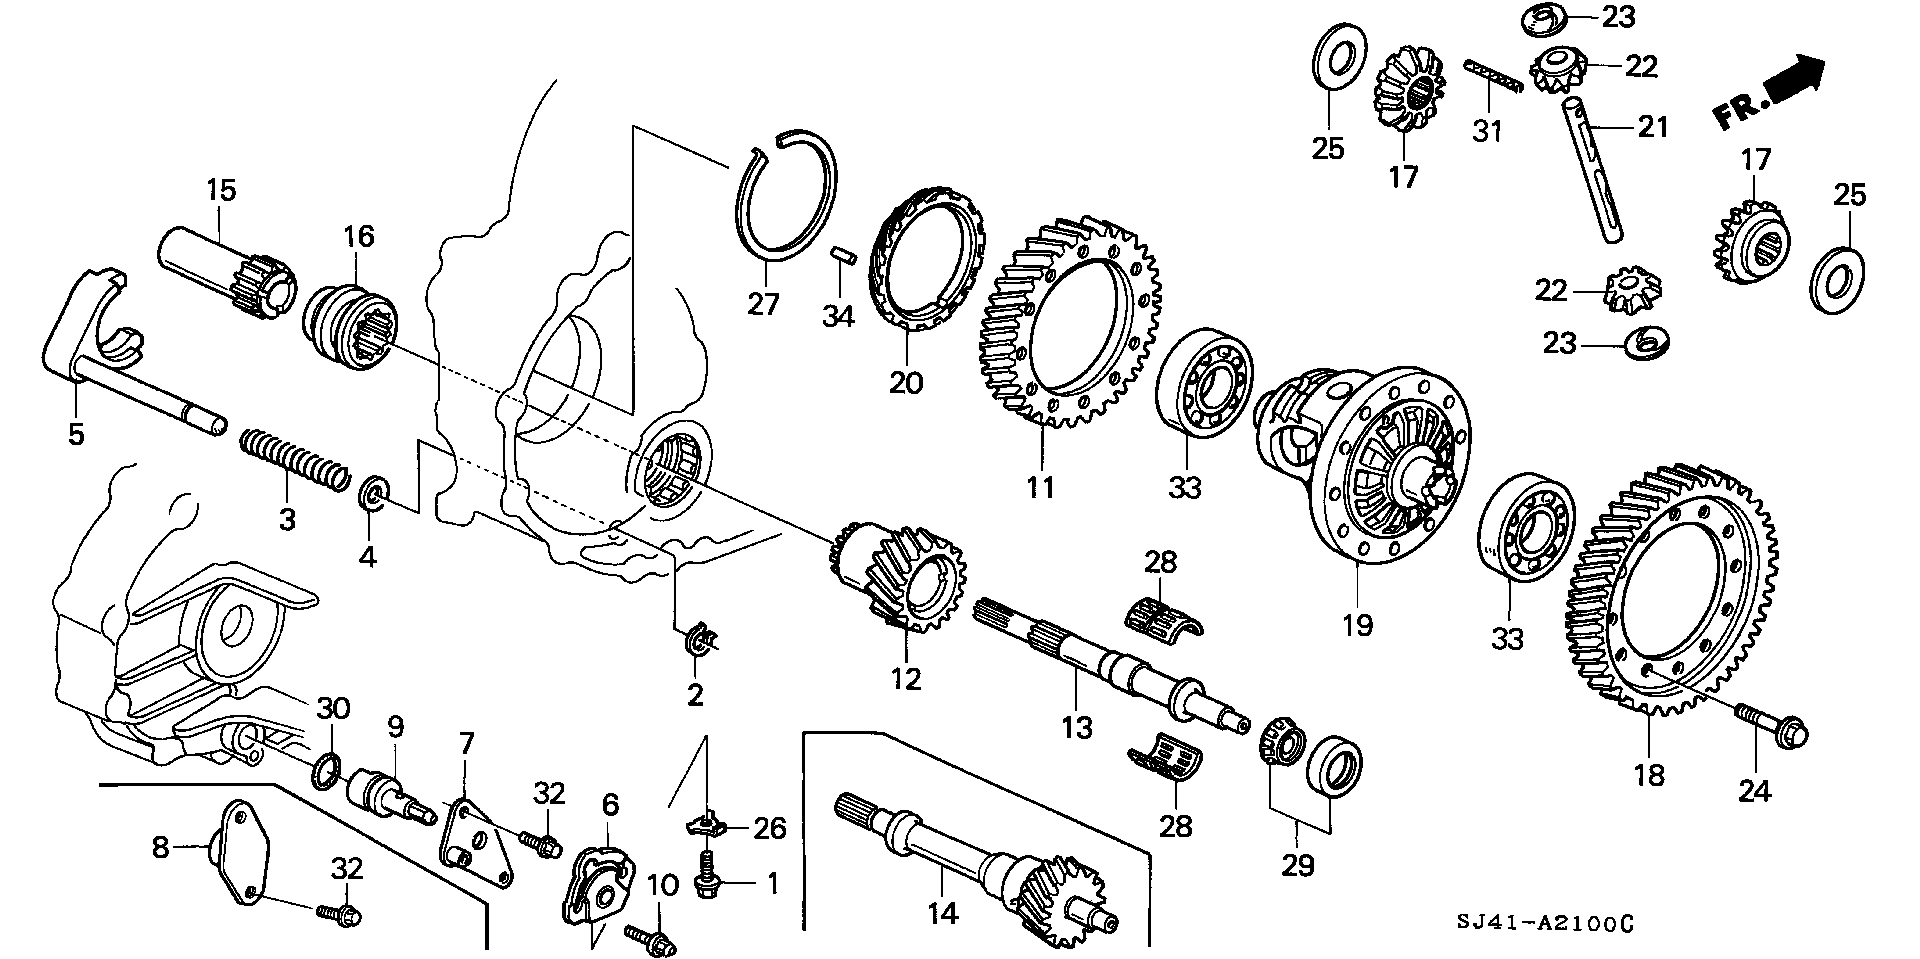 DIFFERENTIAL(4WD)